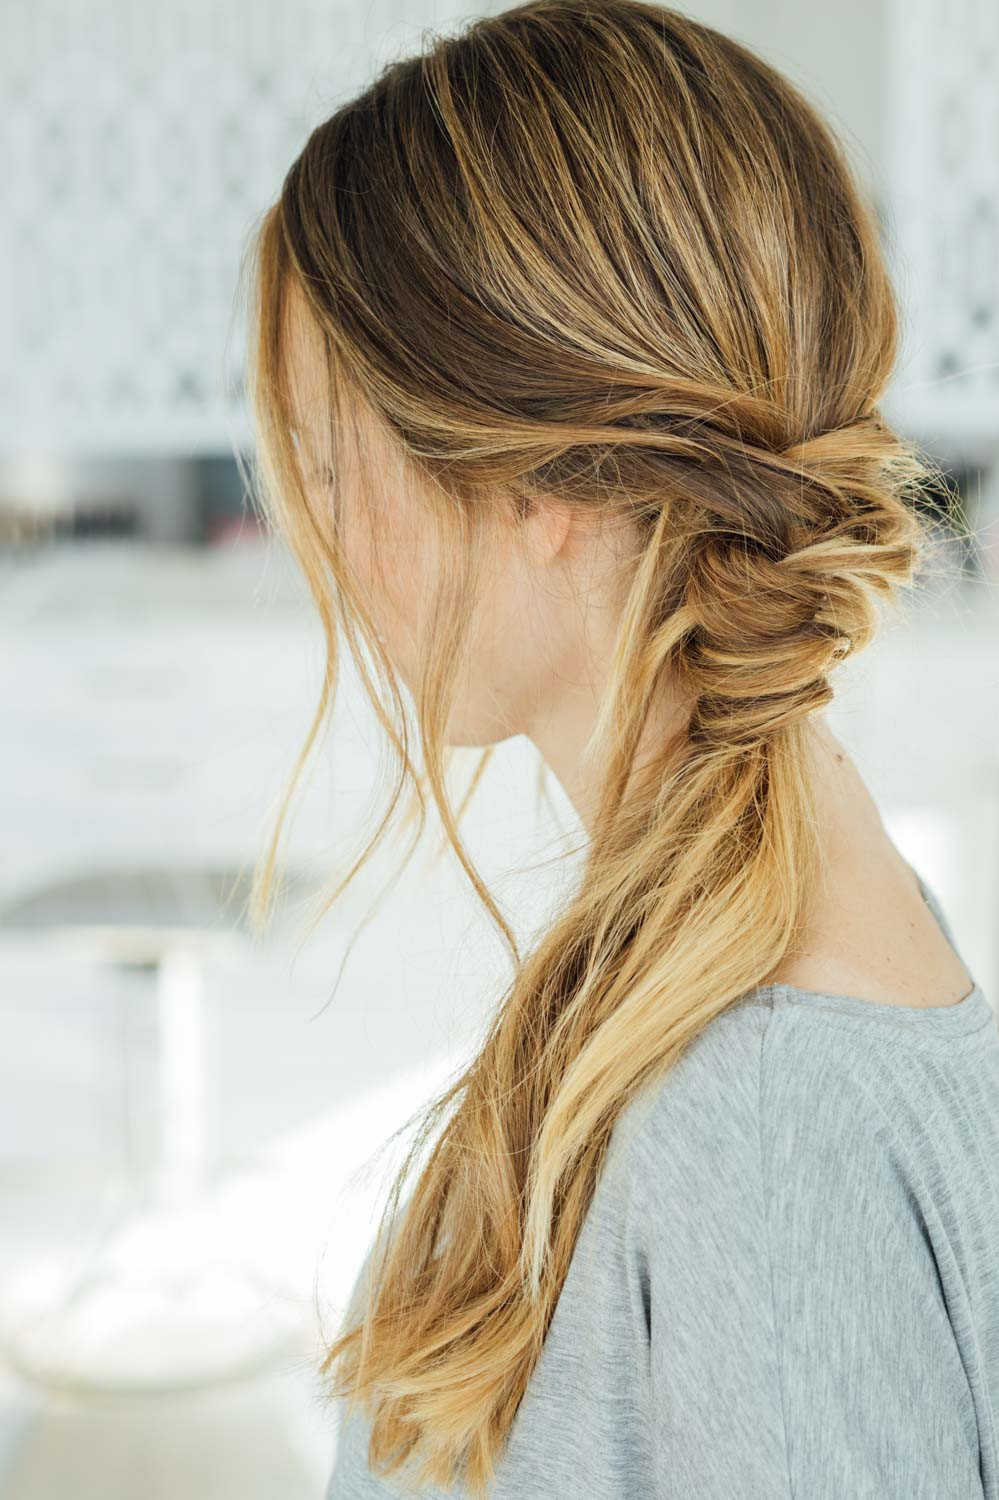 Easy Hairstyles
 16 Easy Hairstyles for Hot Summer Days